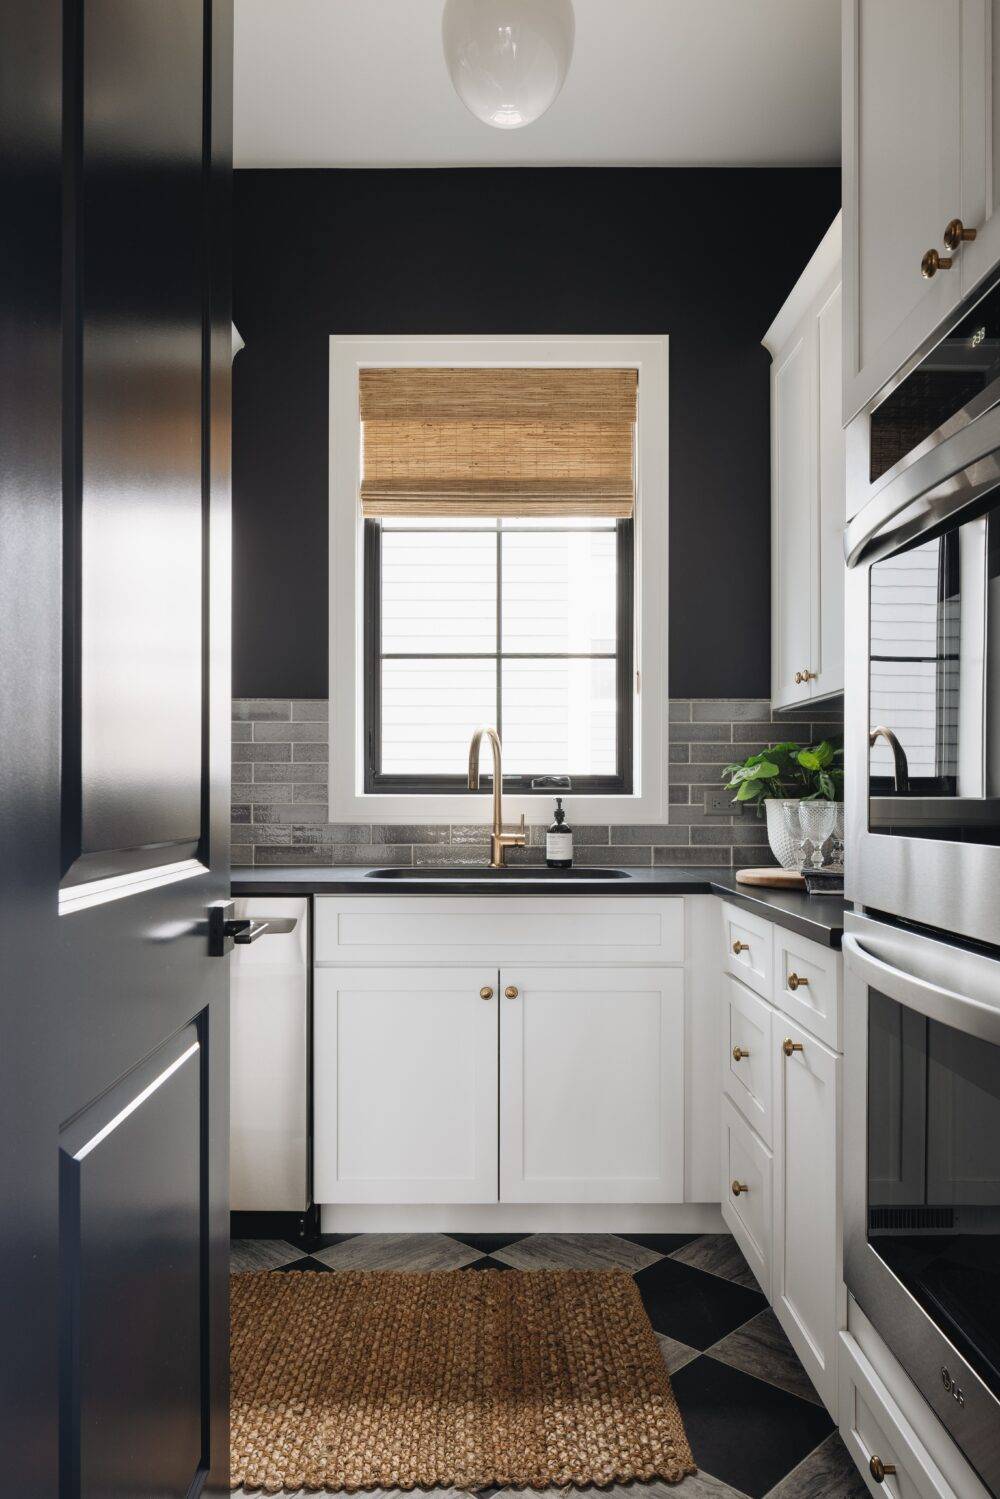 Pantry with sink, grey subway tile backsplash and black and silver limestone floor.